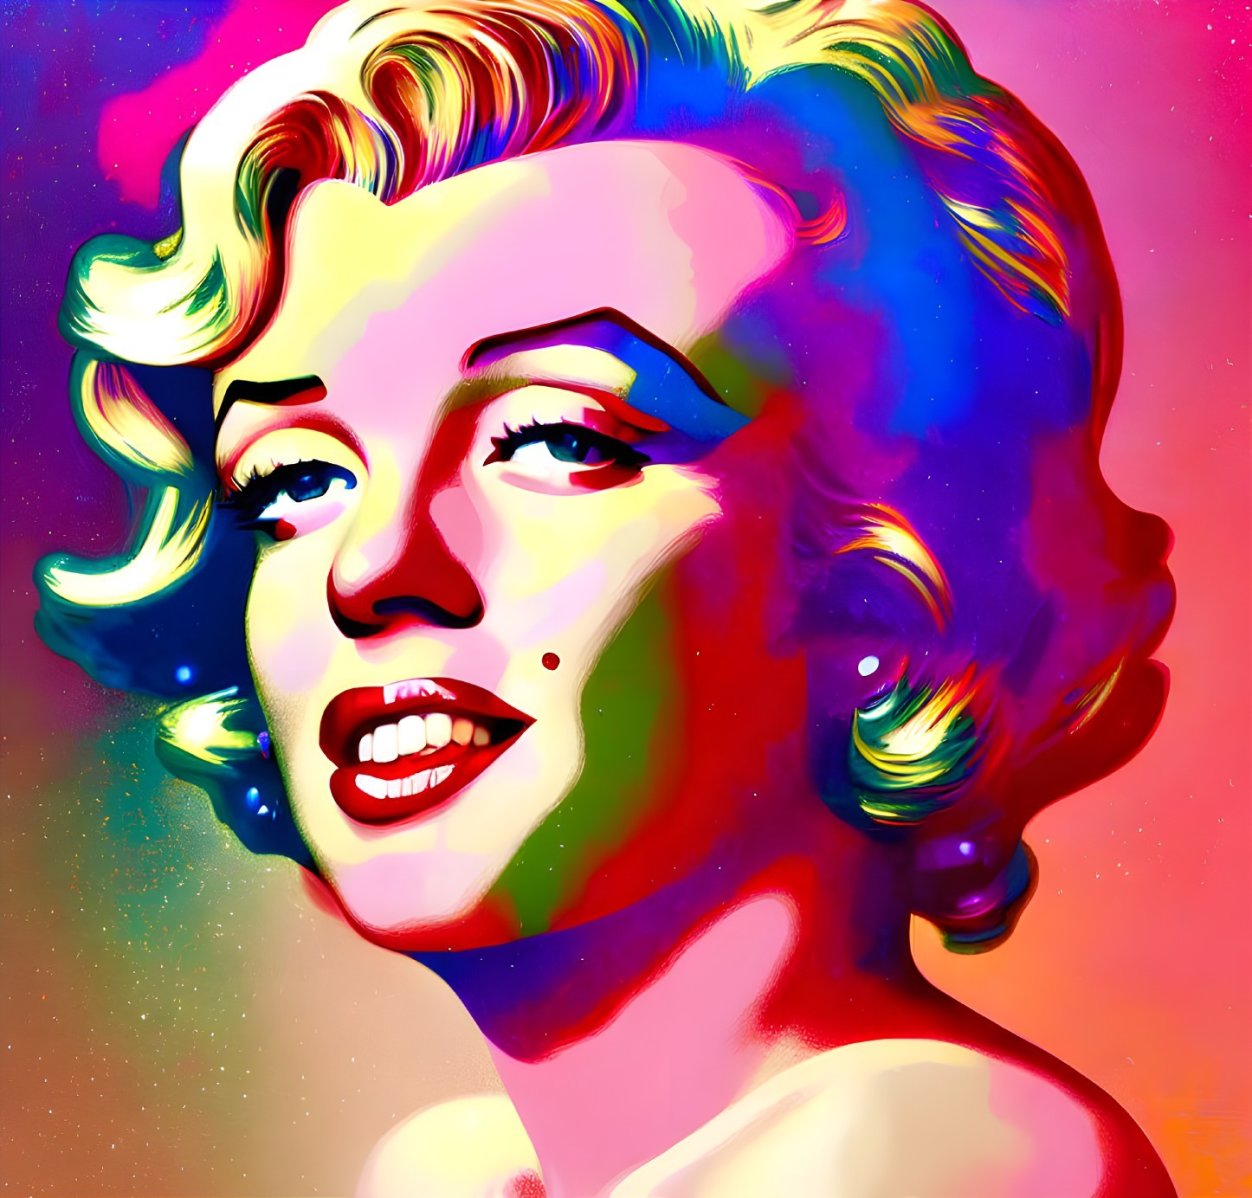 Vibrant pop art portrait of a smiling woman with blonde hair